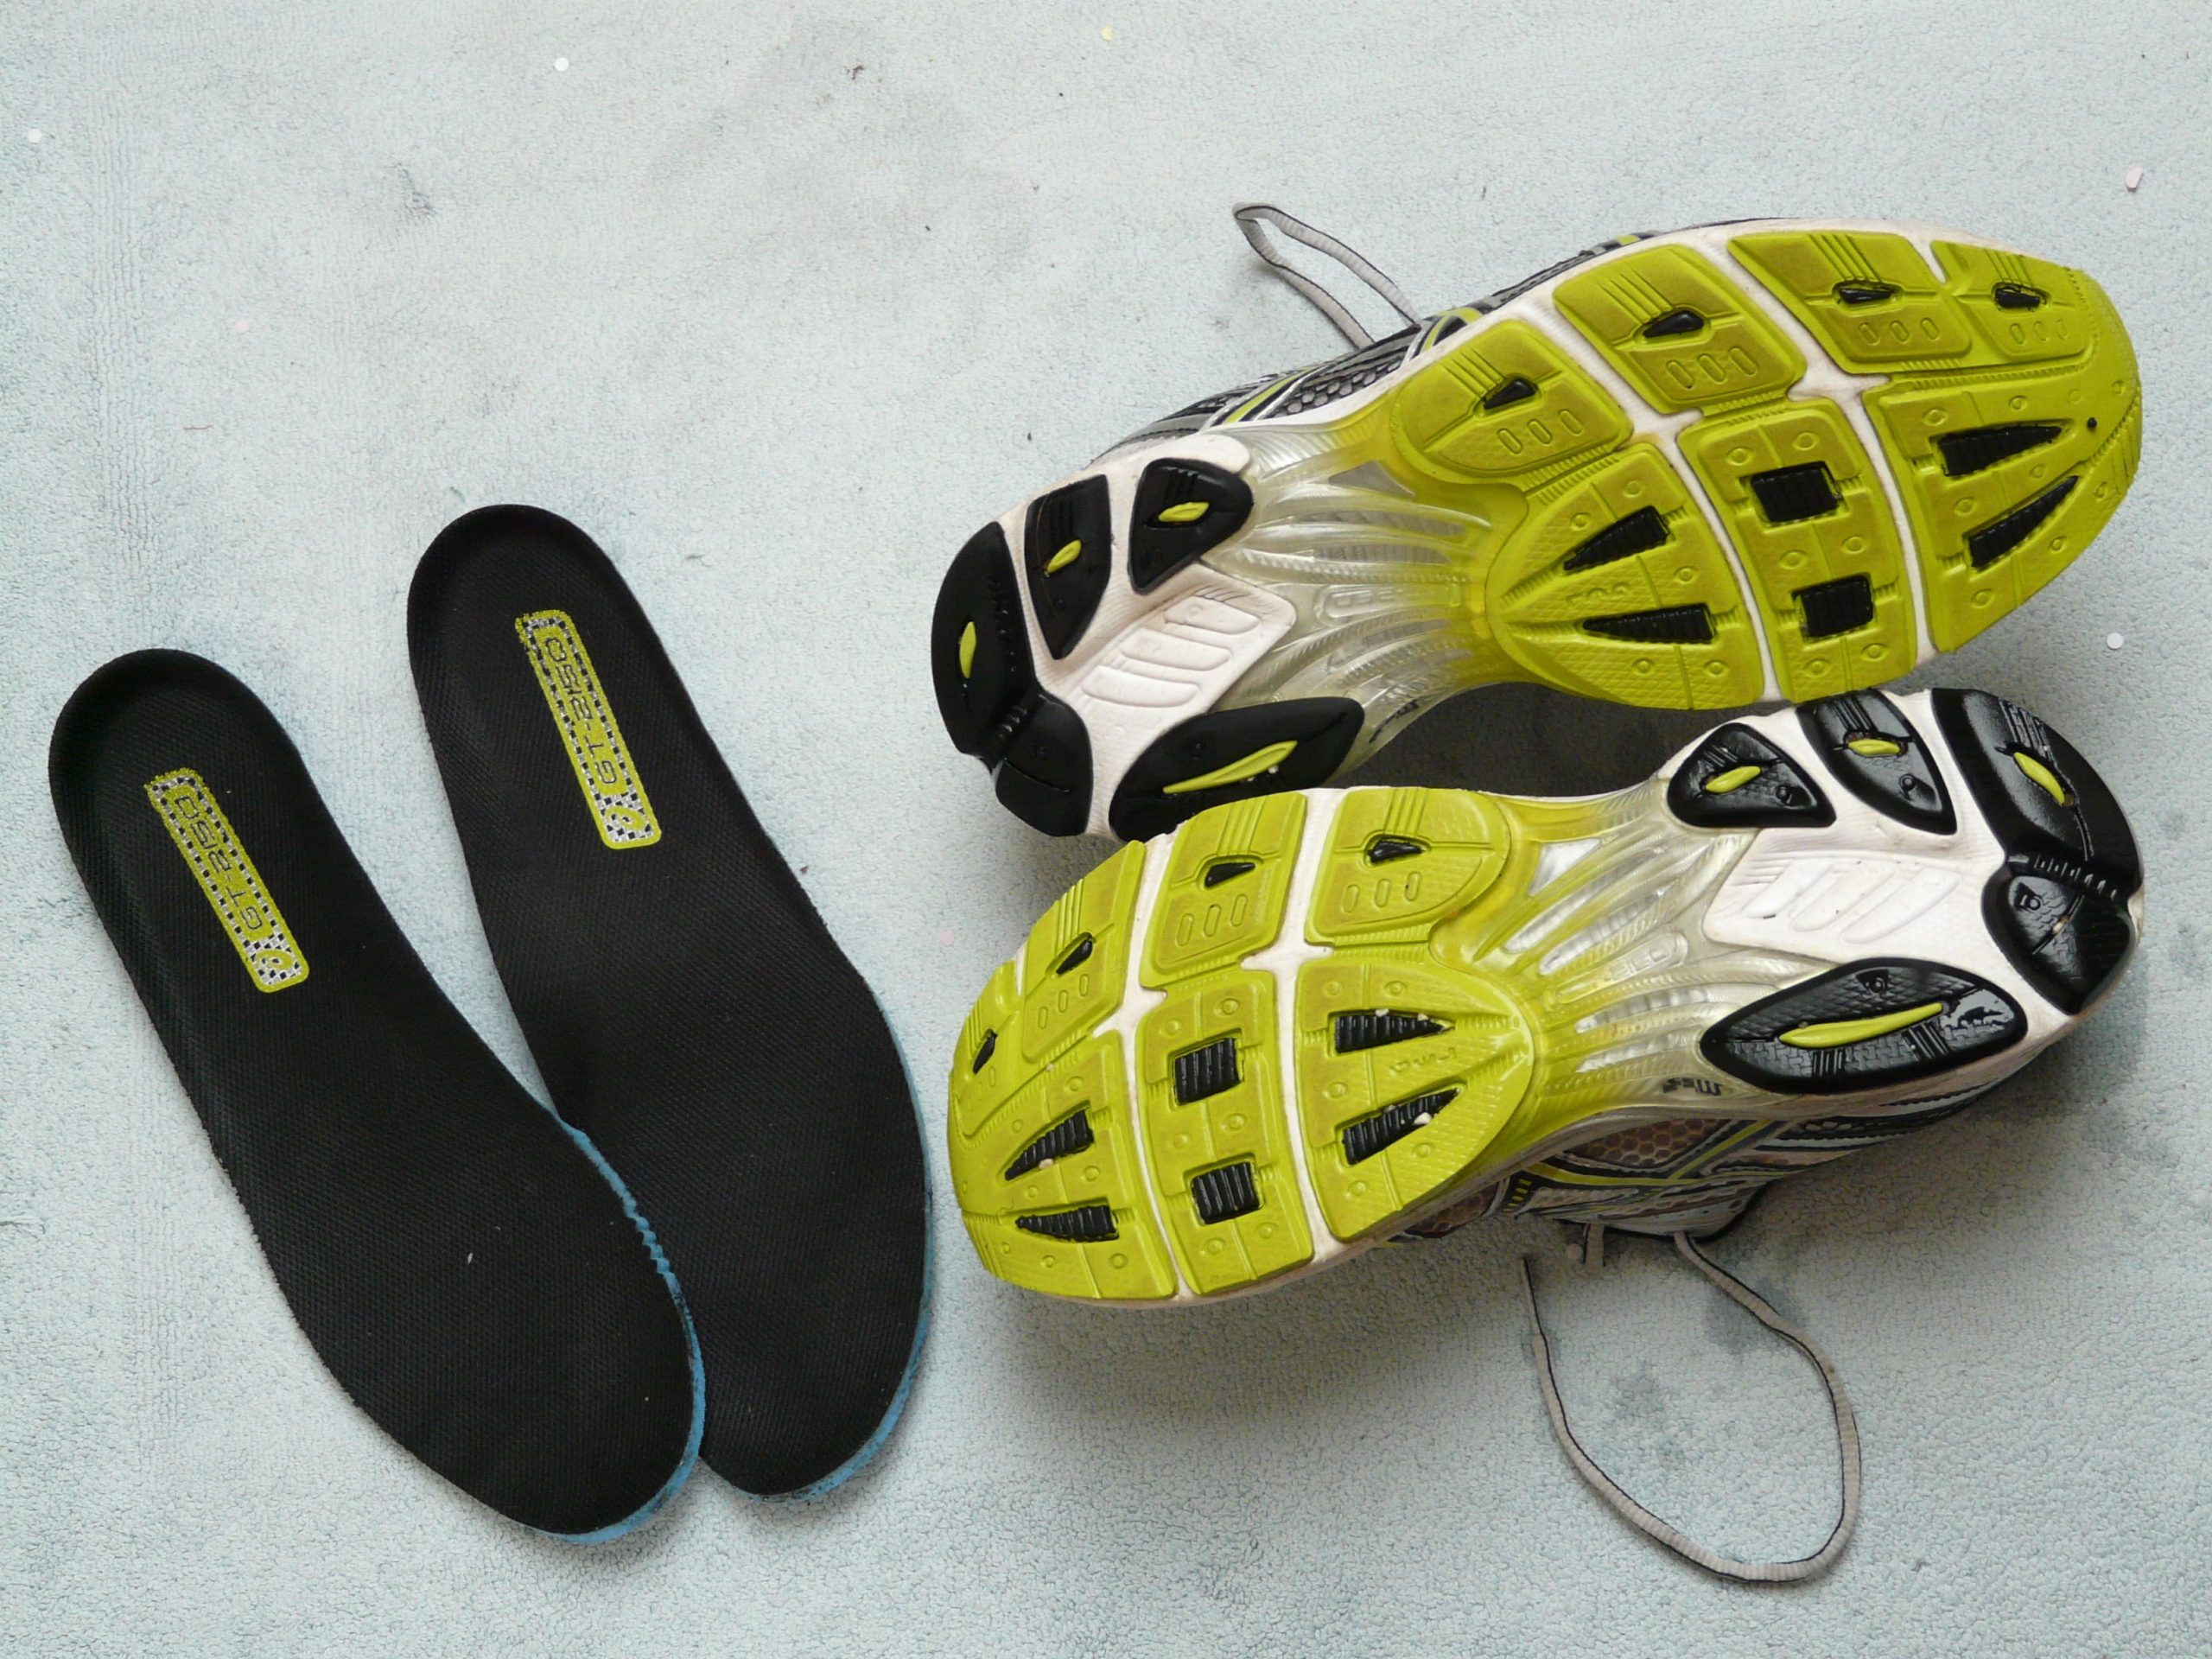 A microprocessor hidden under your feet. What can smart athletic shoe insoles do?